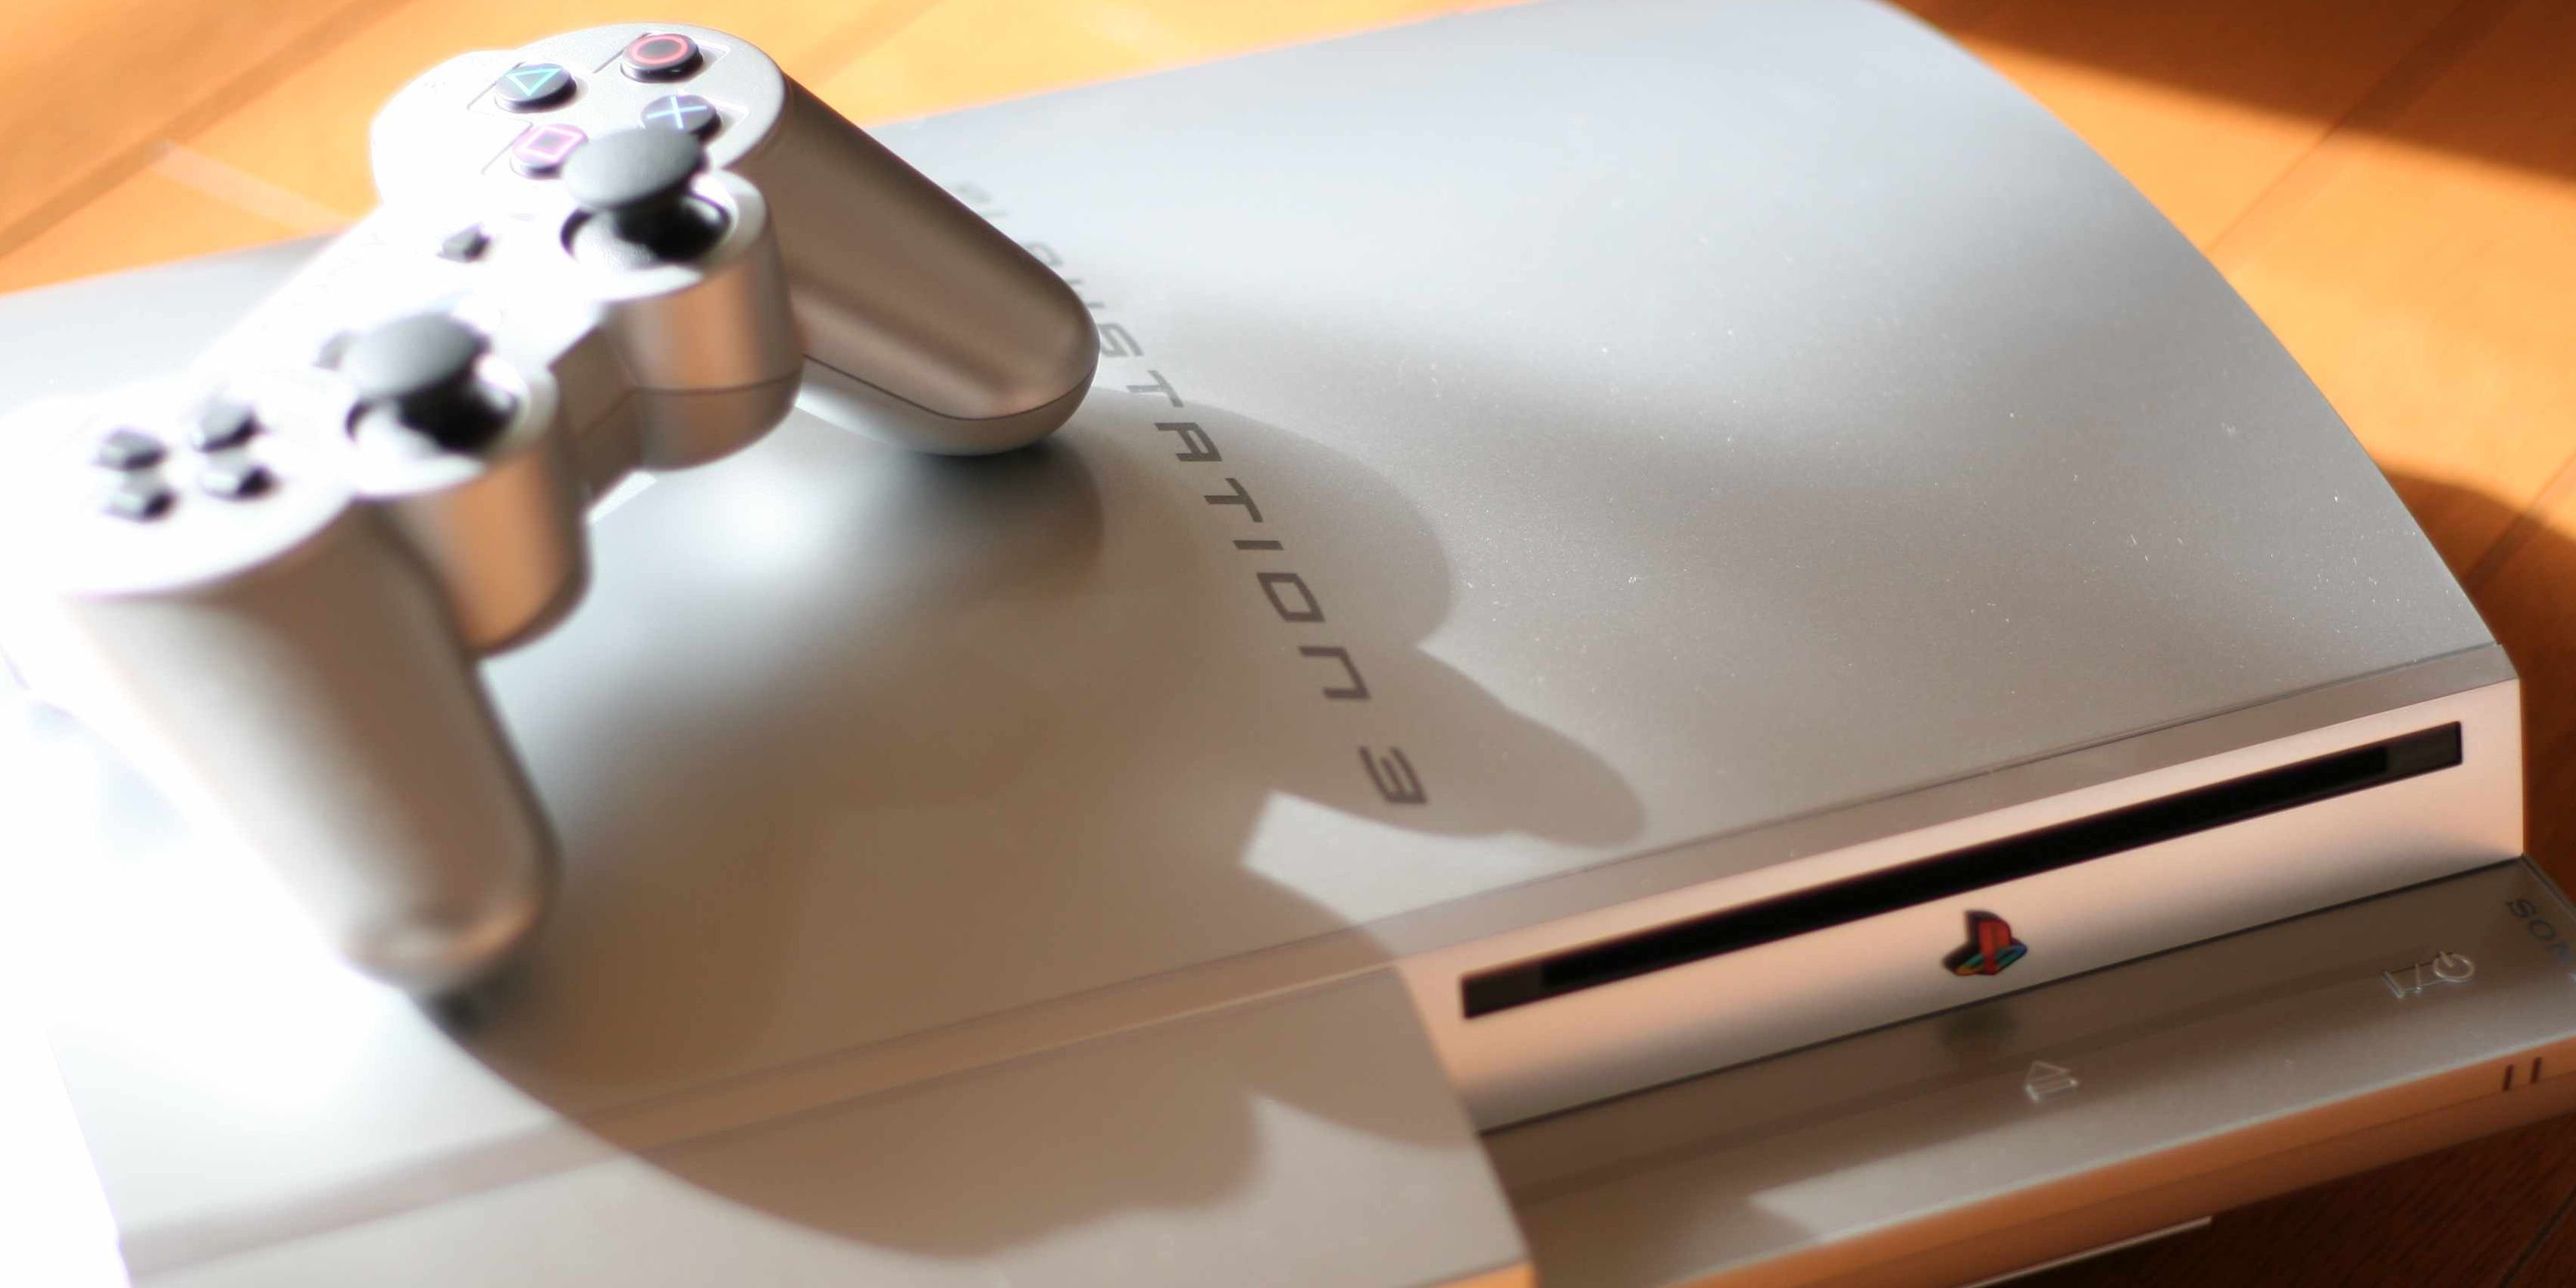 A picture of the white PS3